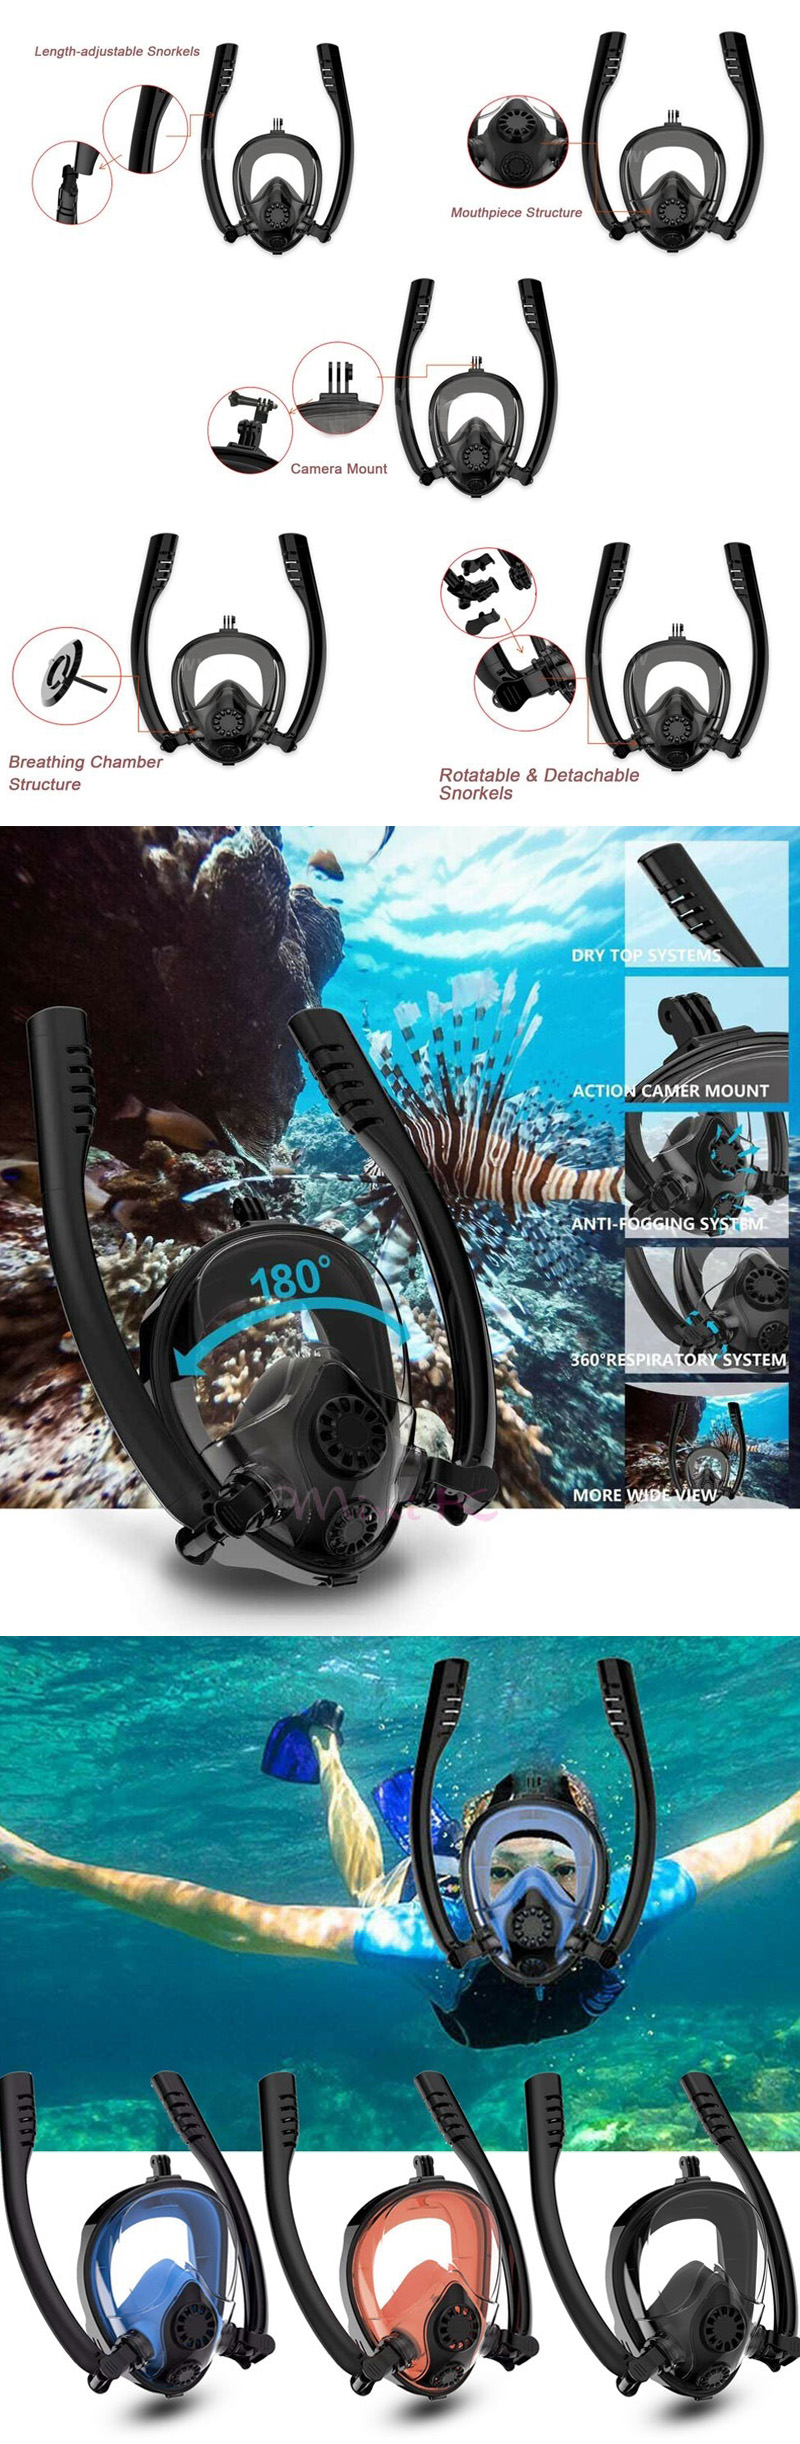 Antifog-Double-Tube-Full-Face-Snorkel-Scuba-Diving-Mask-Swim-Breathing-Goggles-With-Camera-Mount-1456354-2